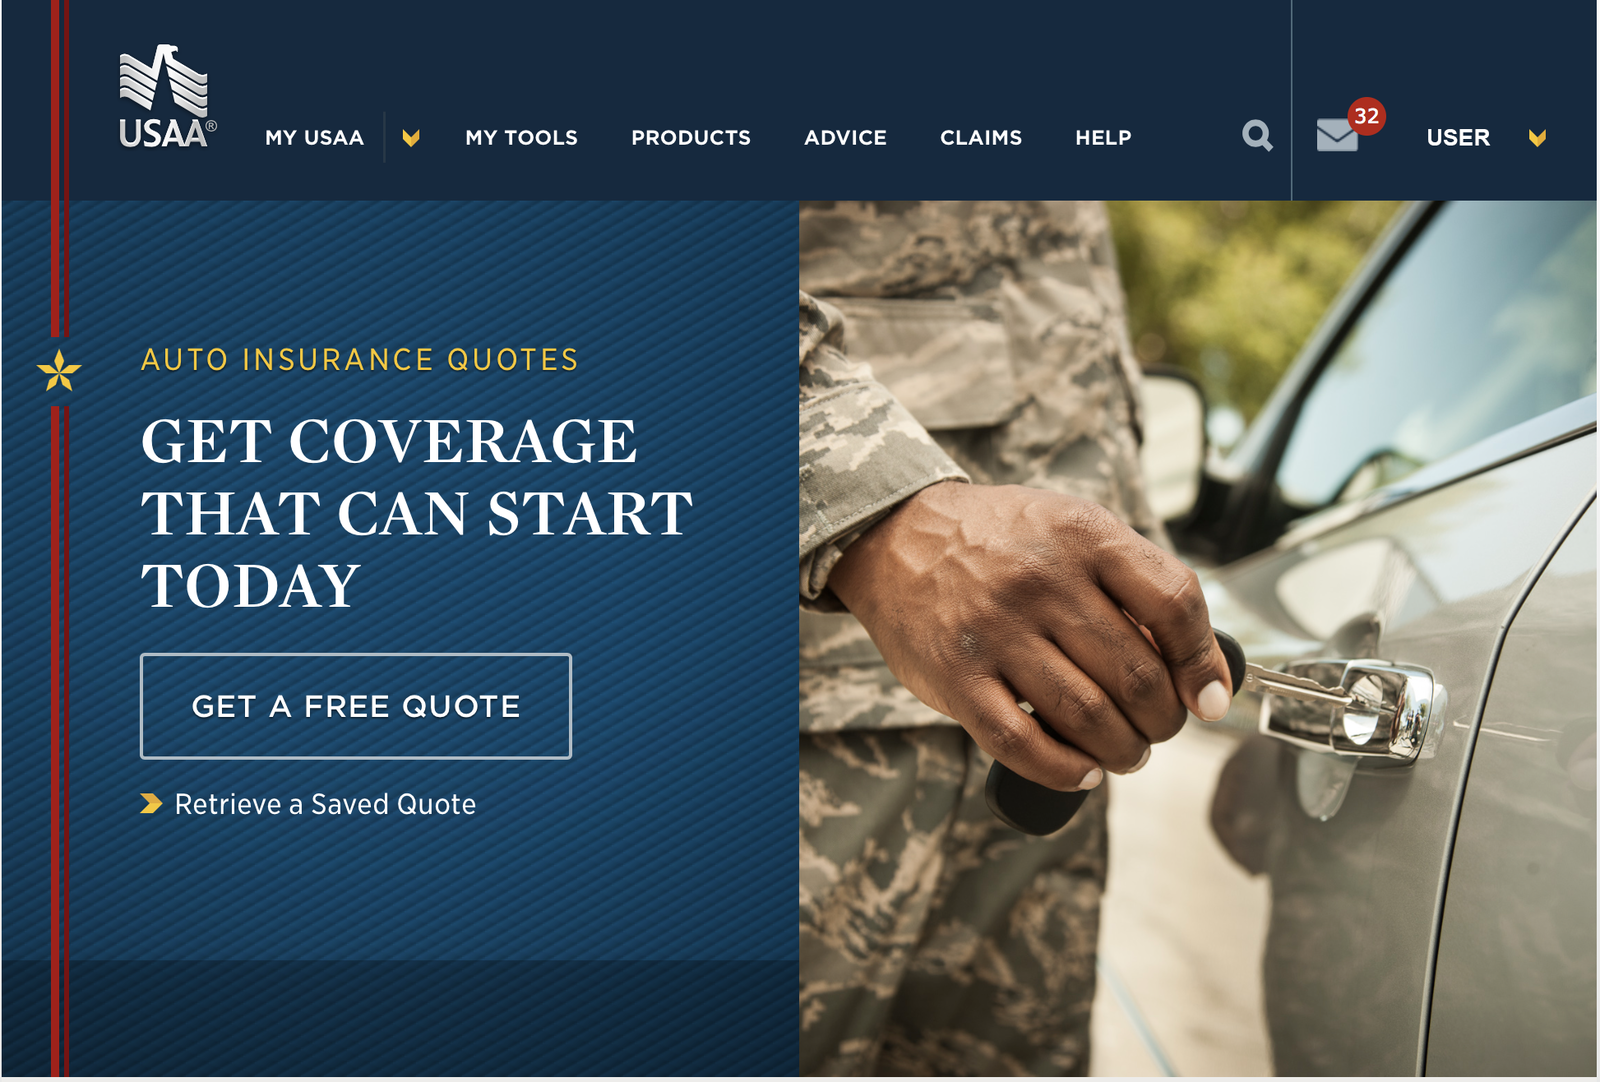 USAA quote first step